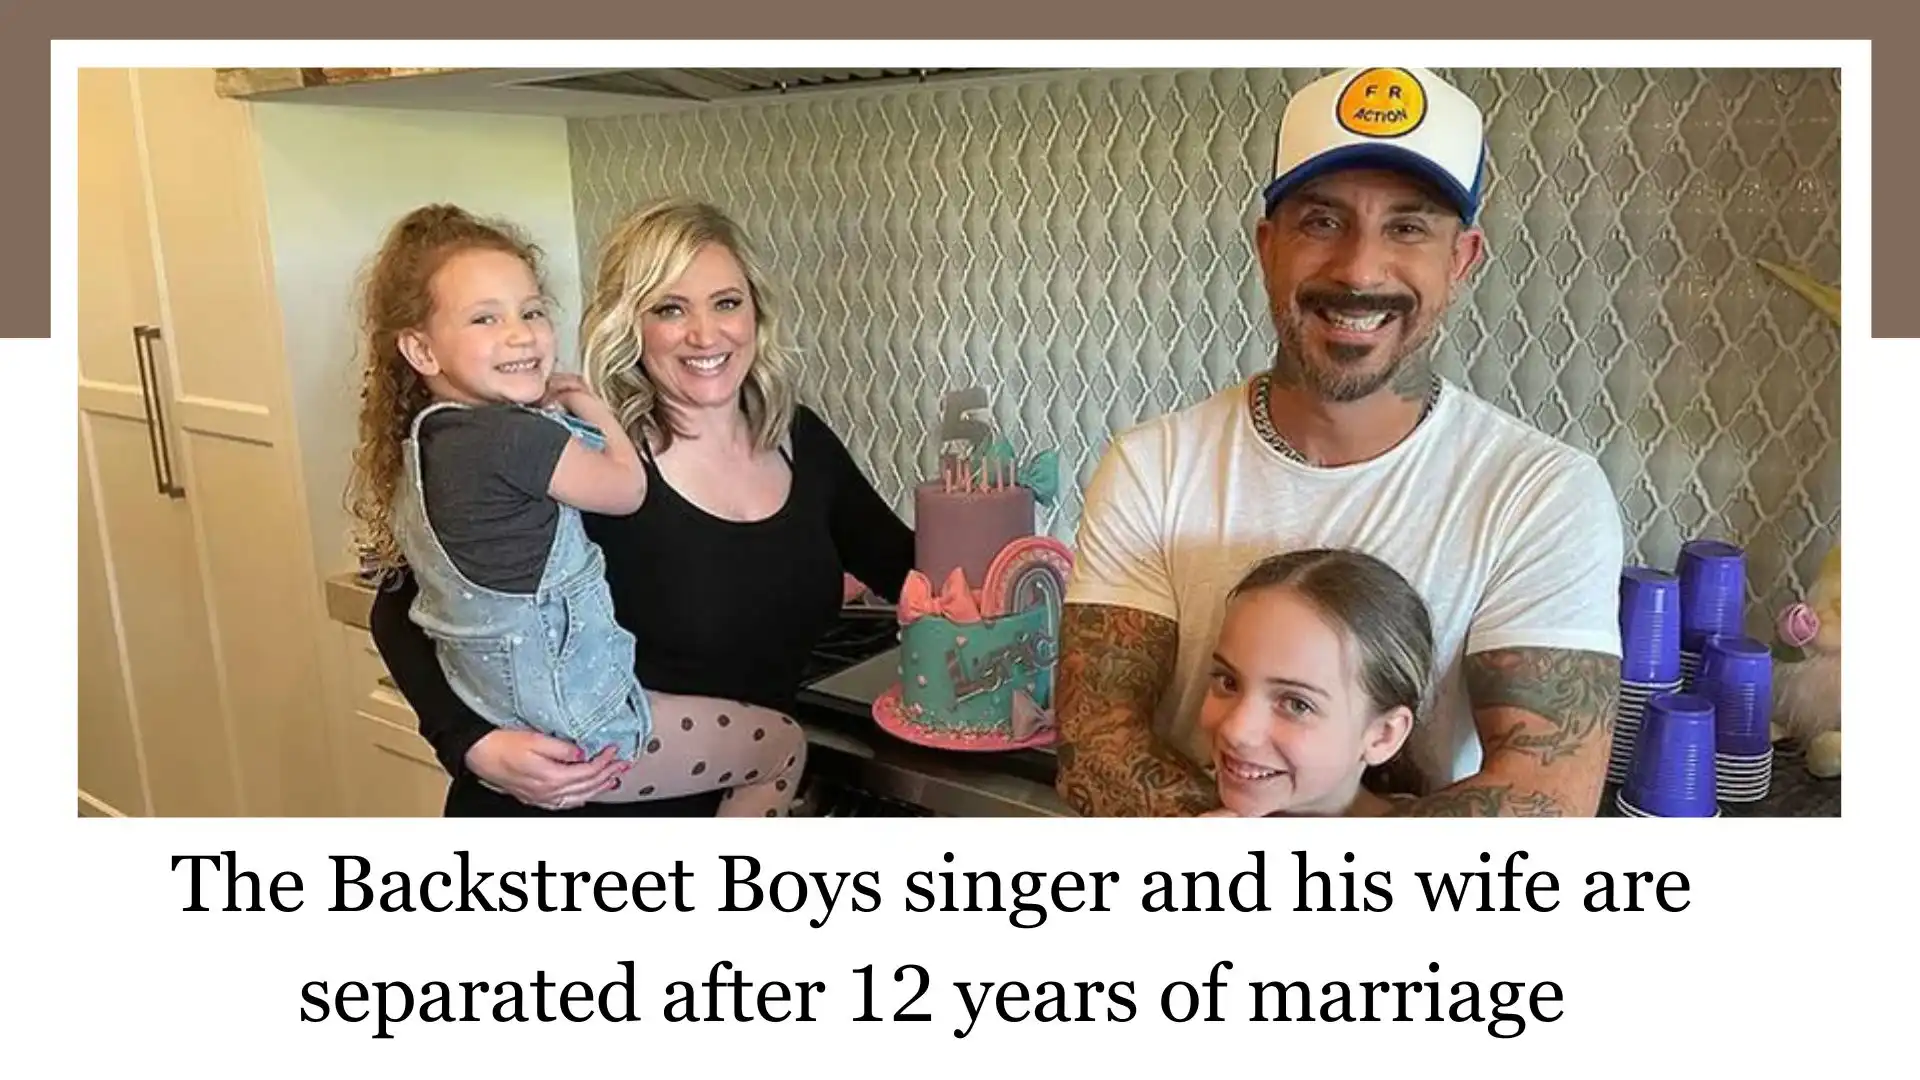 The Backstreet Boys singer and his wife are separated after 12 years of marriage